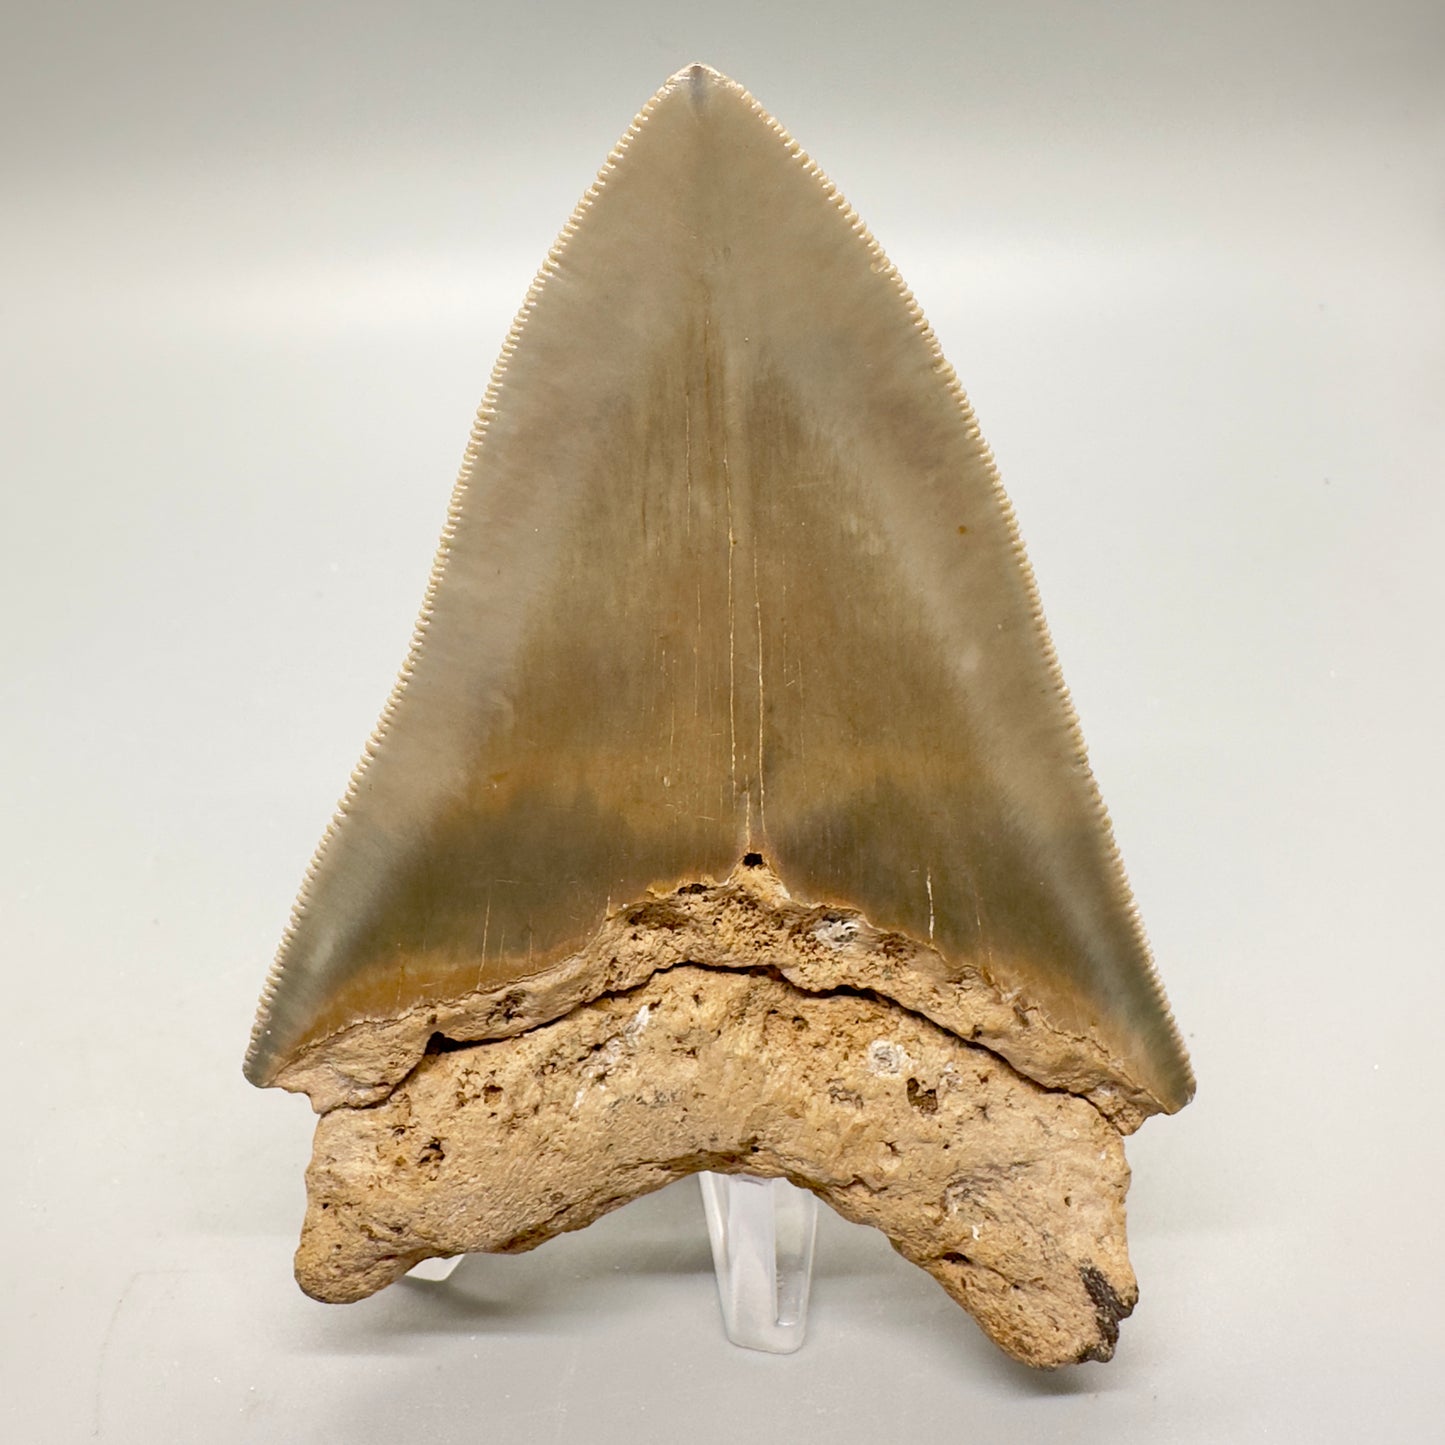 Affordable, Colorful 4.03" Fossil Megalodon Tooth from North Carolina CM4591 - Back